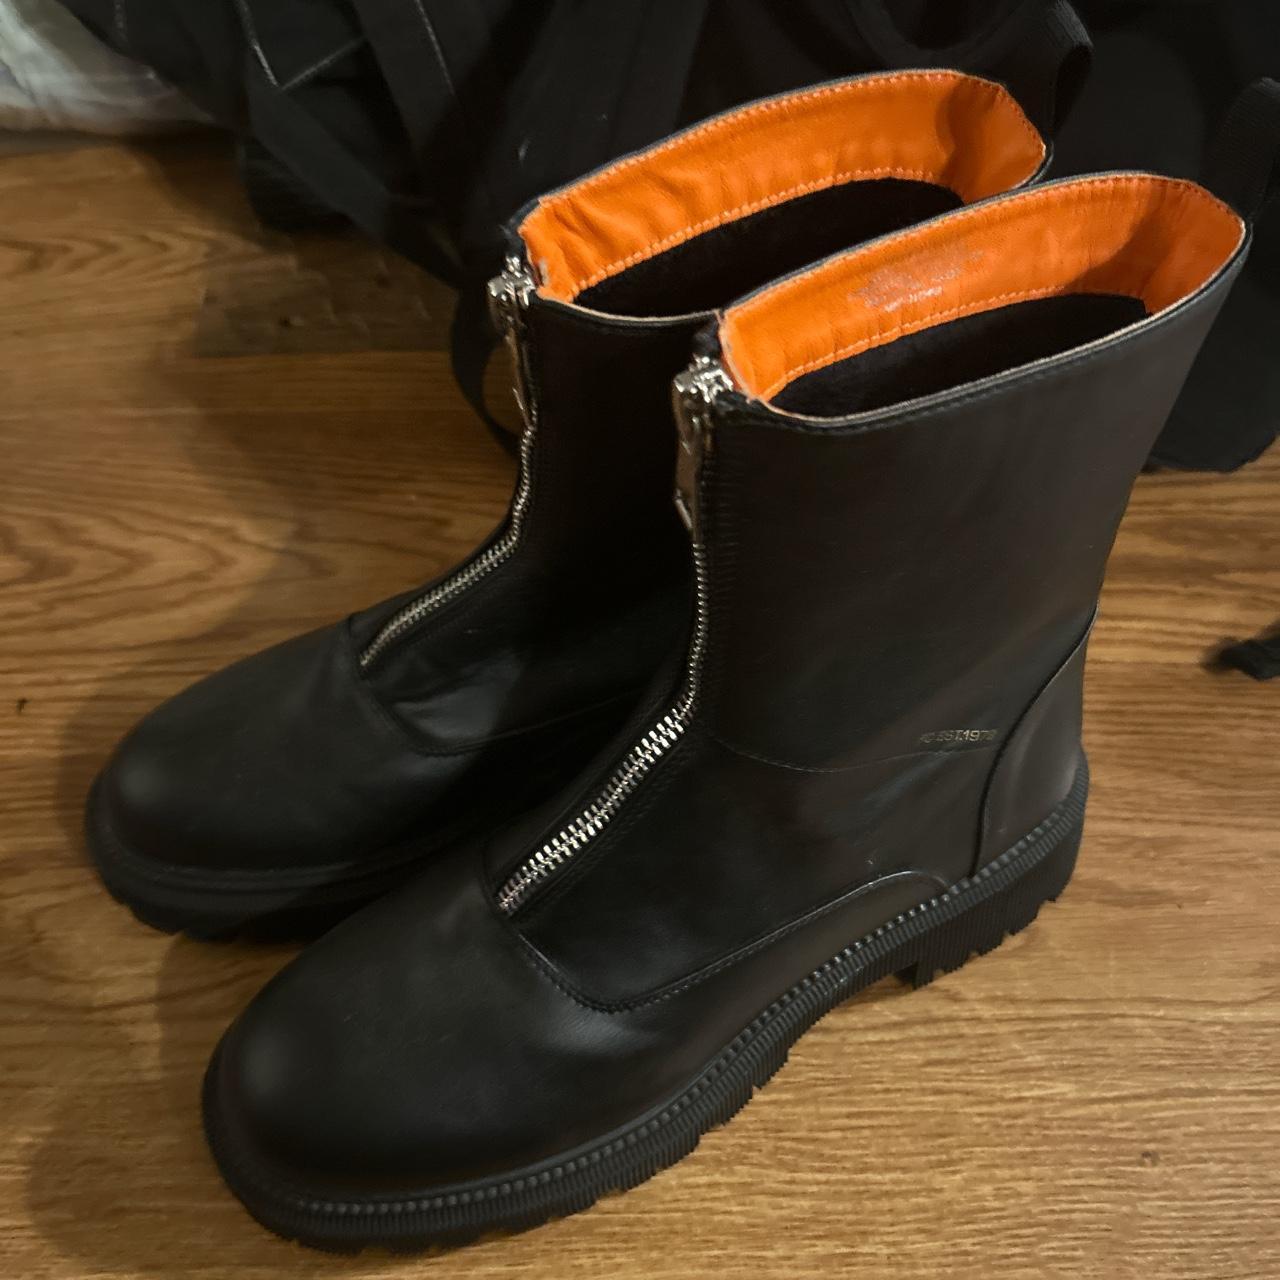 French Connection Men's Black and Orange Boots | Depop